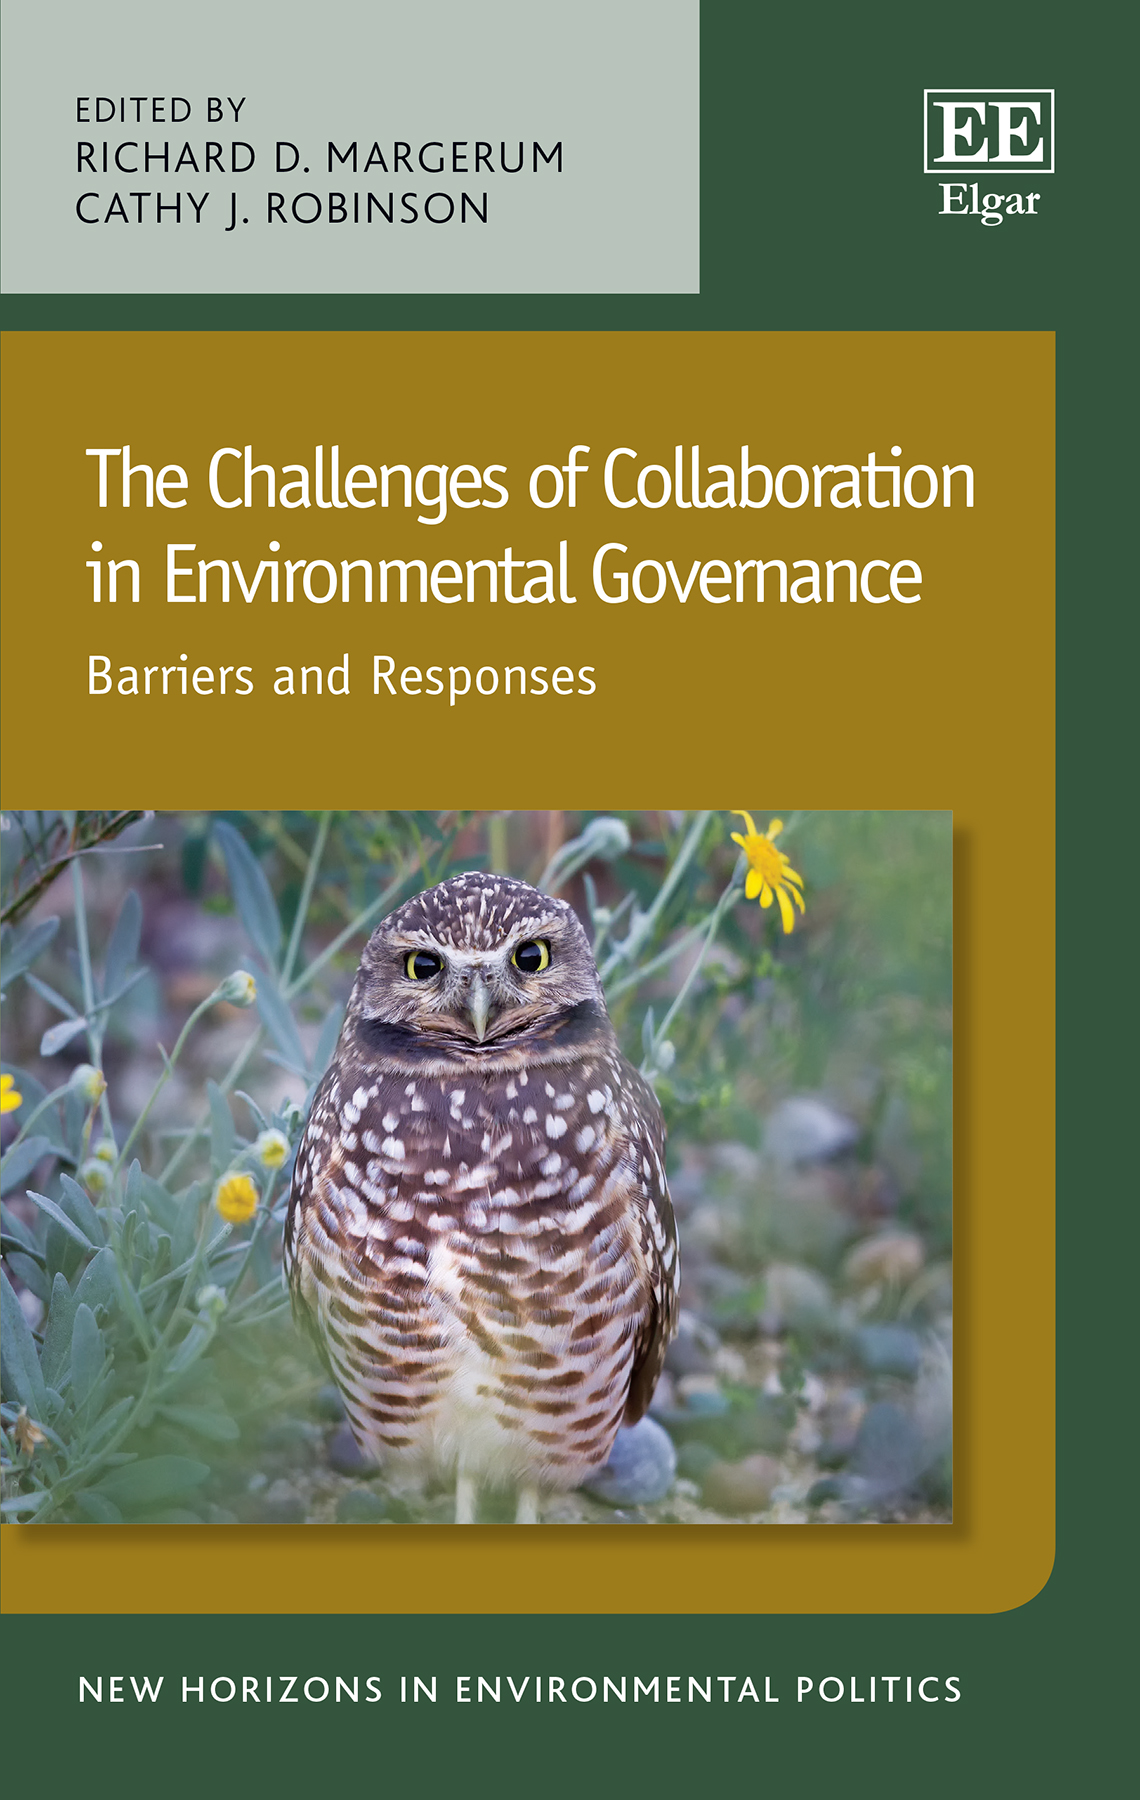 The Challenges of Collaboration in Environmental Governance